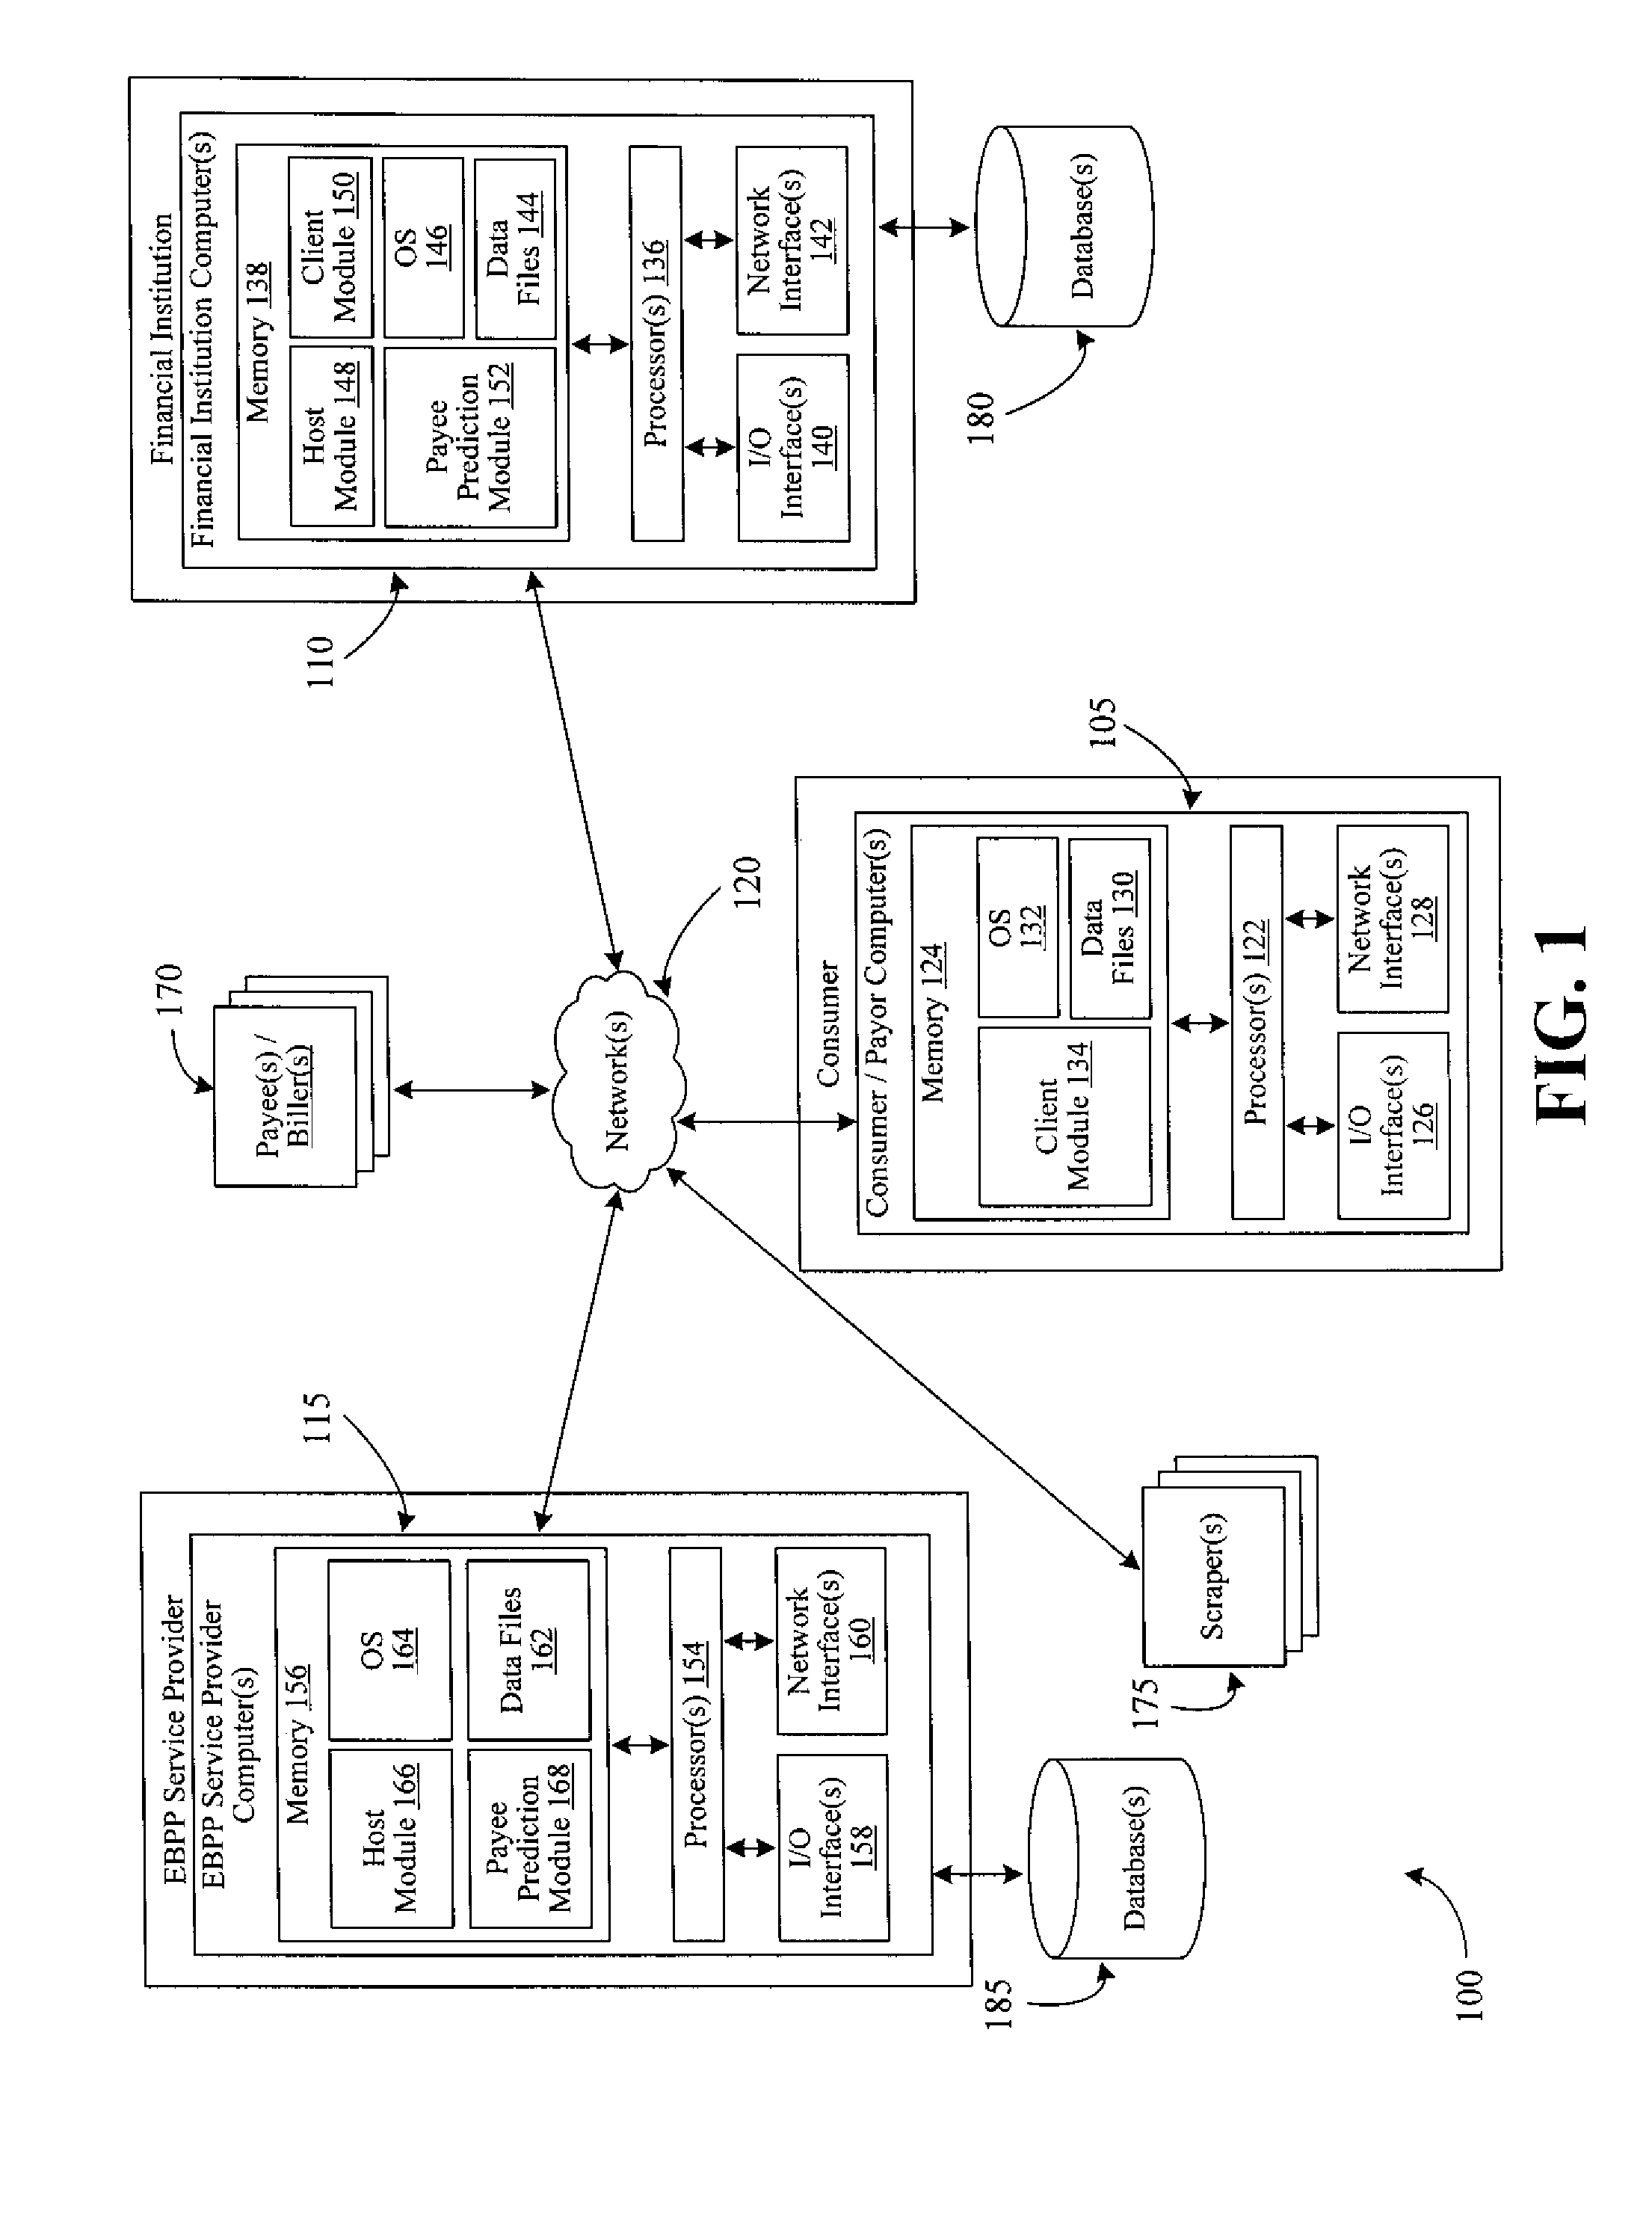 Systems, methods, and apparatus for establishing payees based on cleared items posted to a financial account